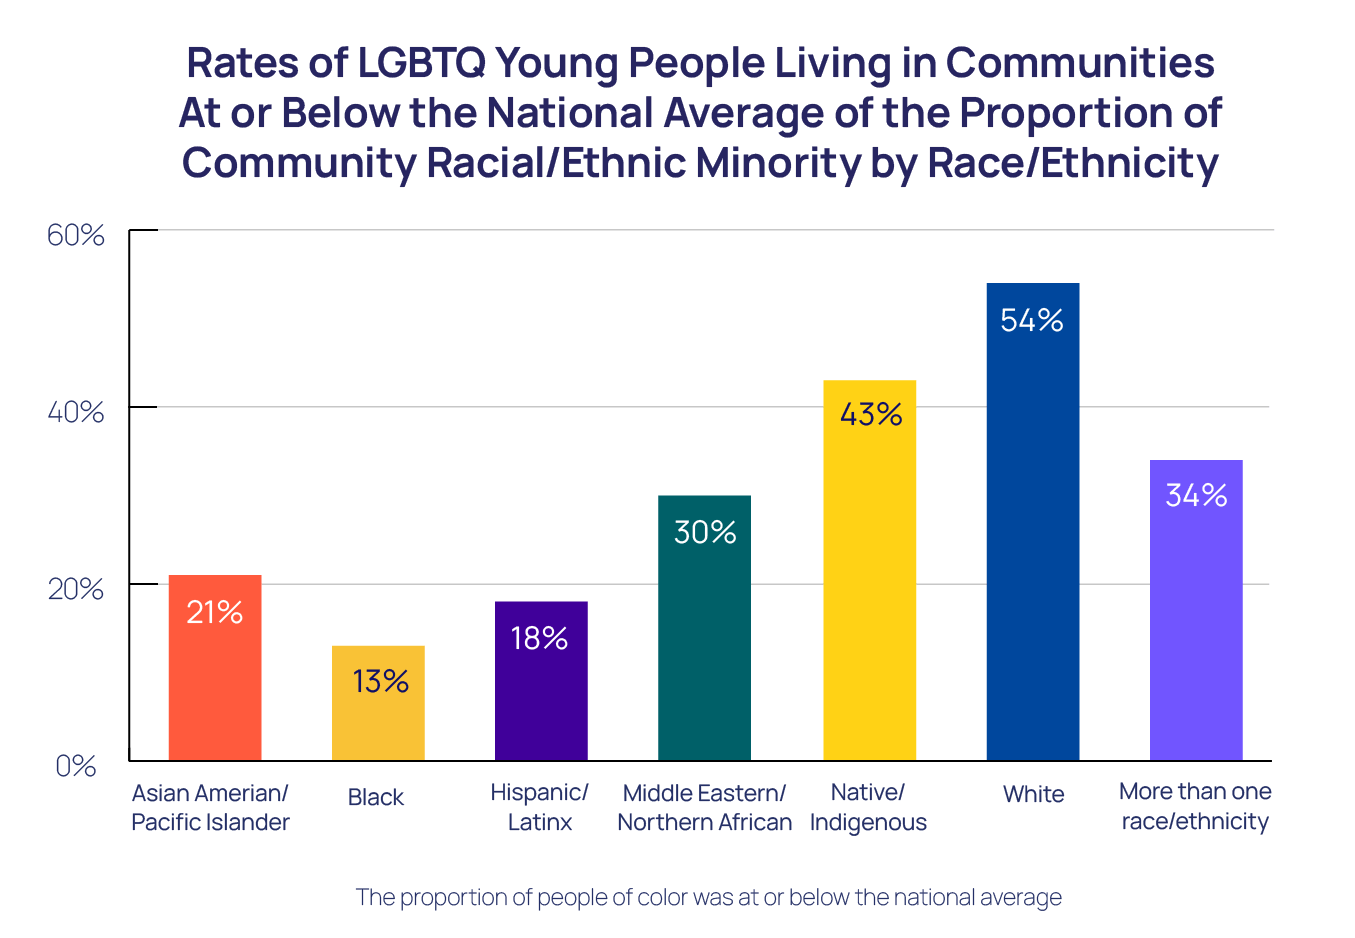 Rates of LGBTQ Young people Living in Communities At or Below the National Average of the Proportion of Community Racial/Ethnic Minority by Race/Ethnicity Bar Chart